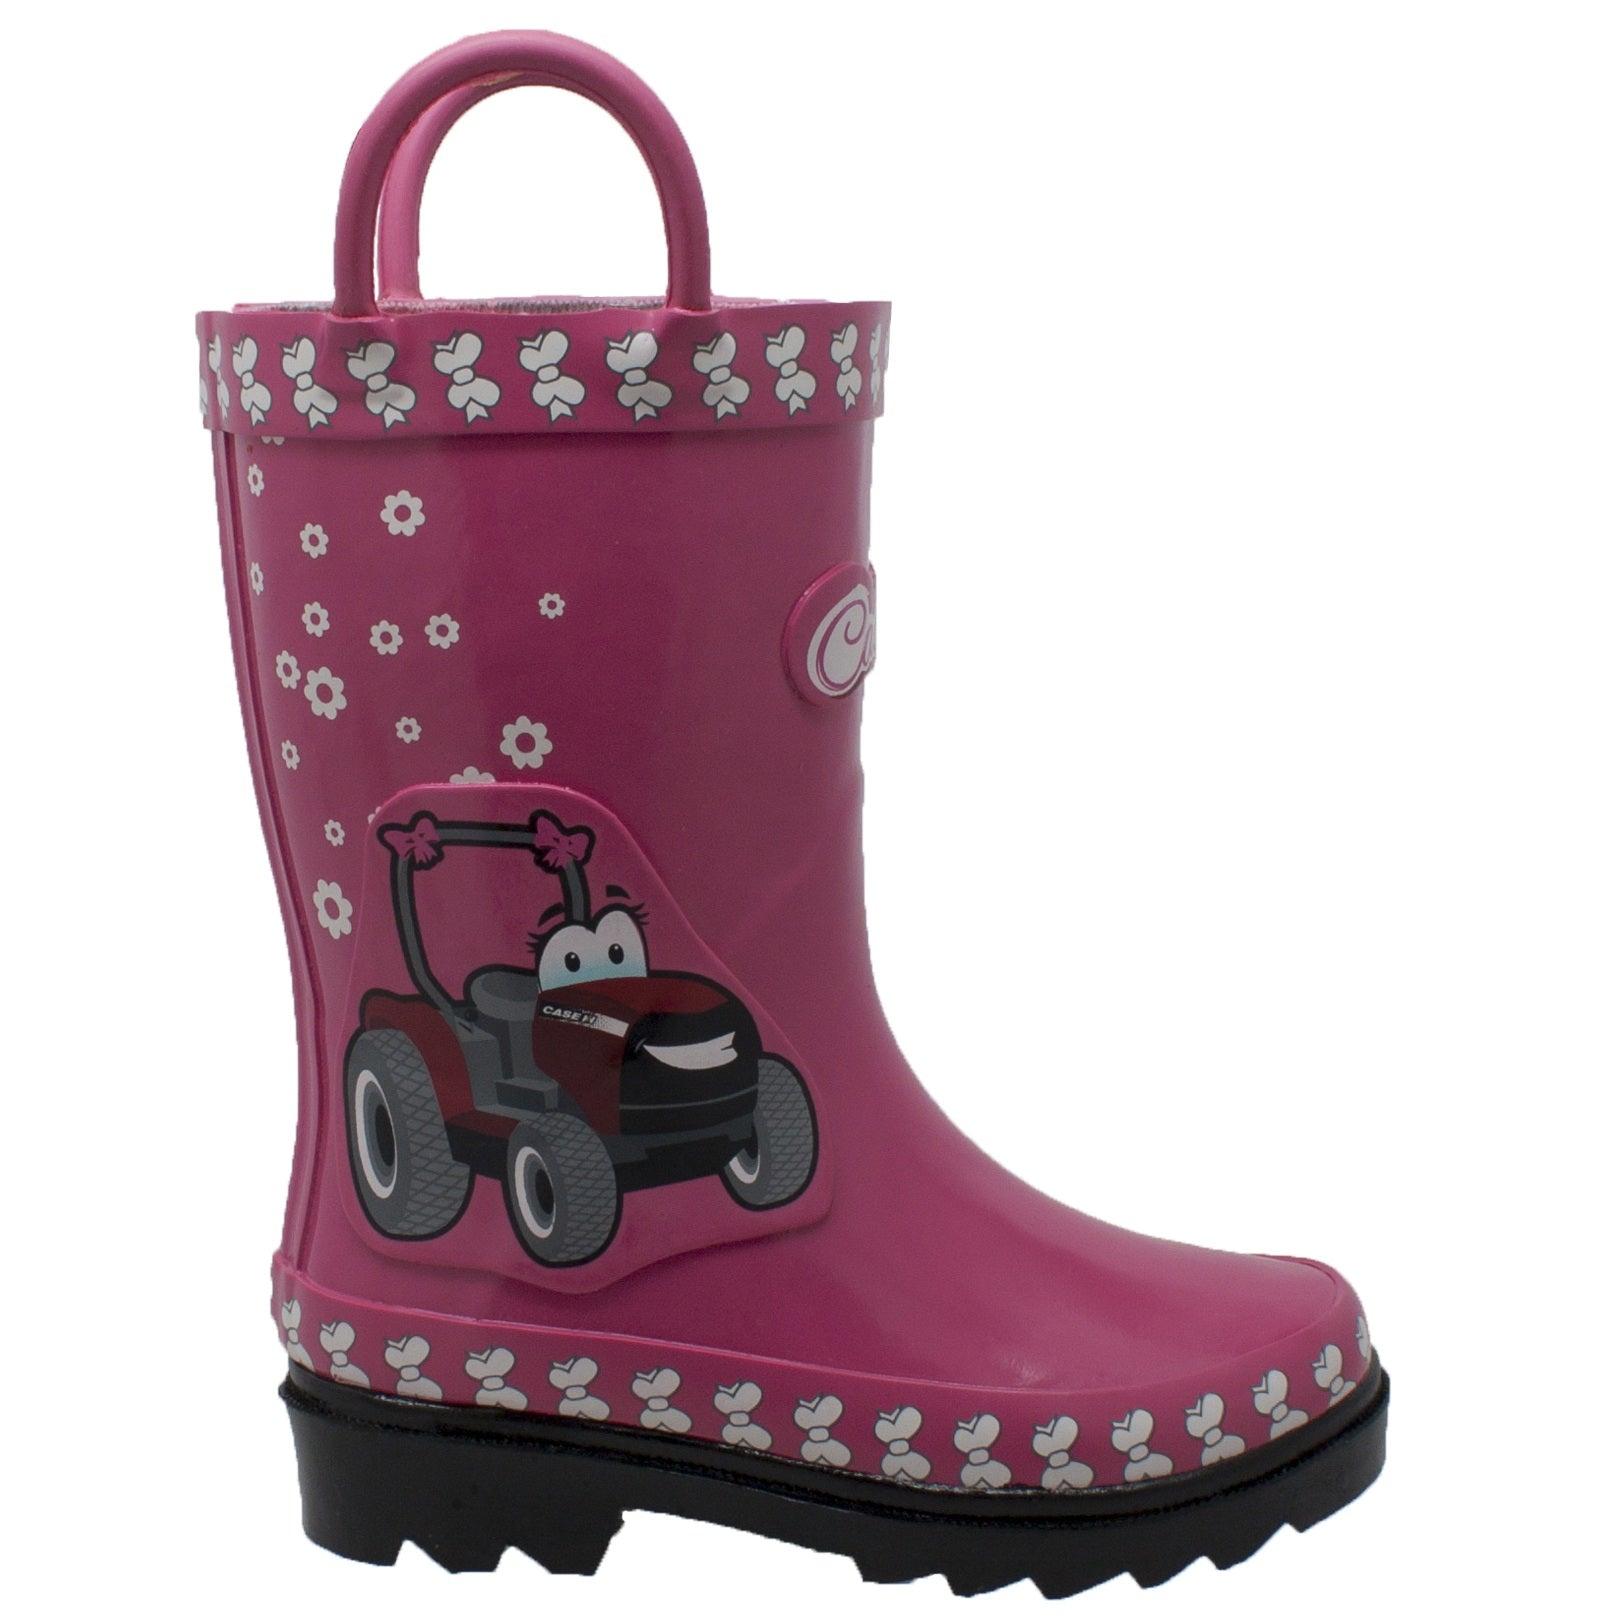 Case IH Toddler's 3D Fern Farmall Rubber Boot Pink - Flyclothing LLC